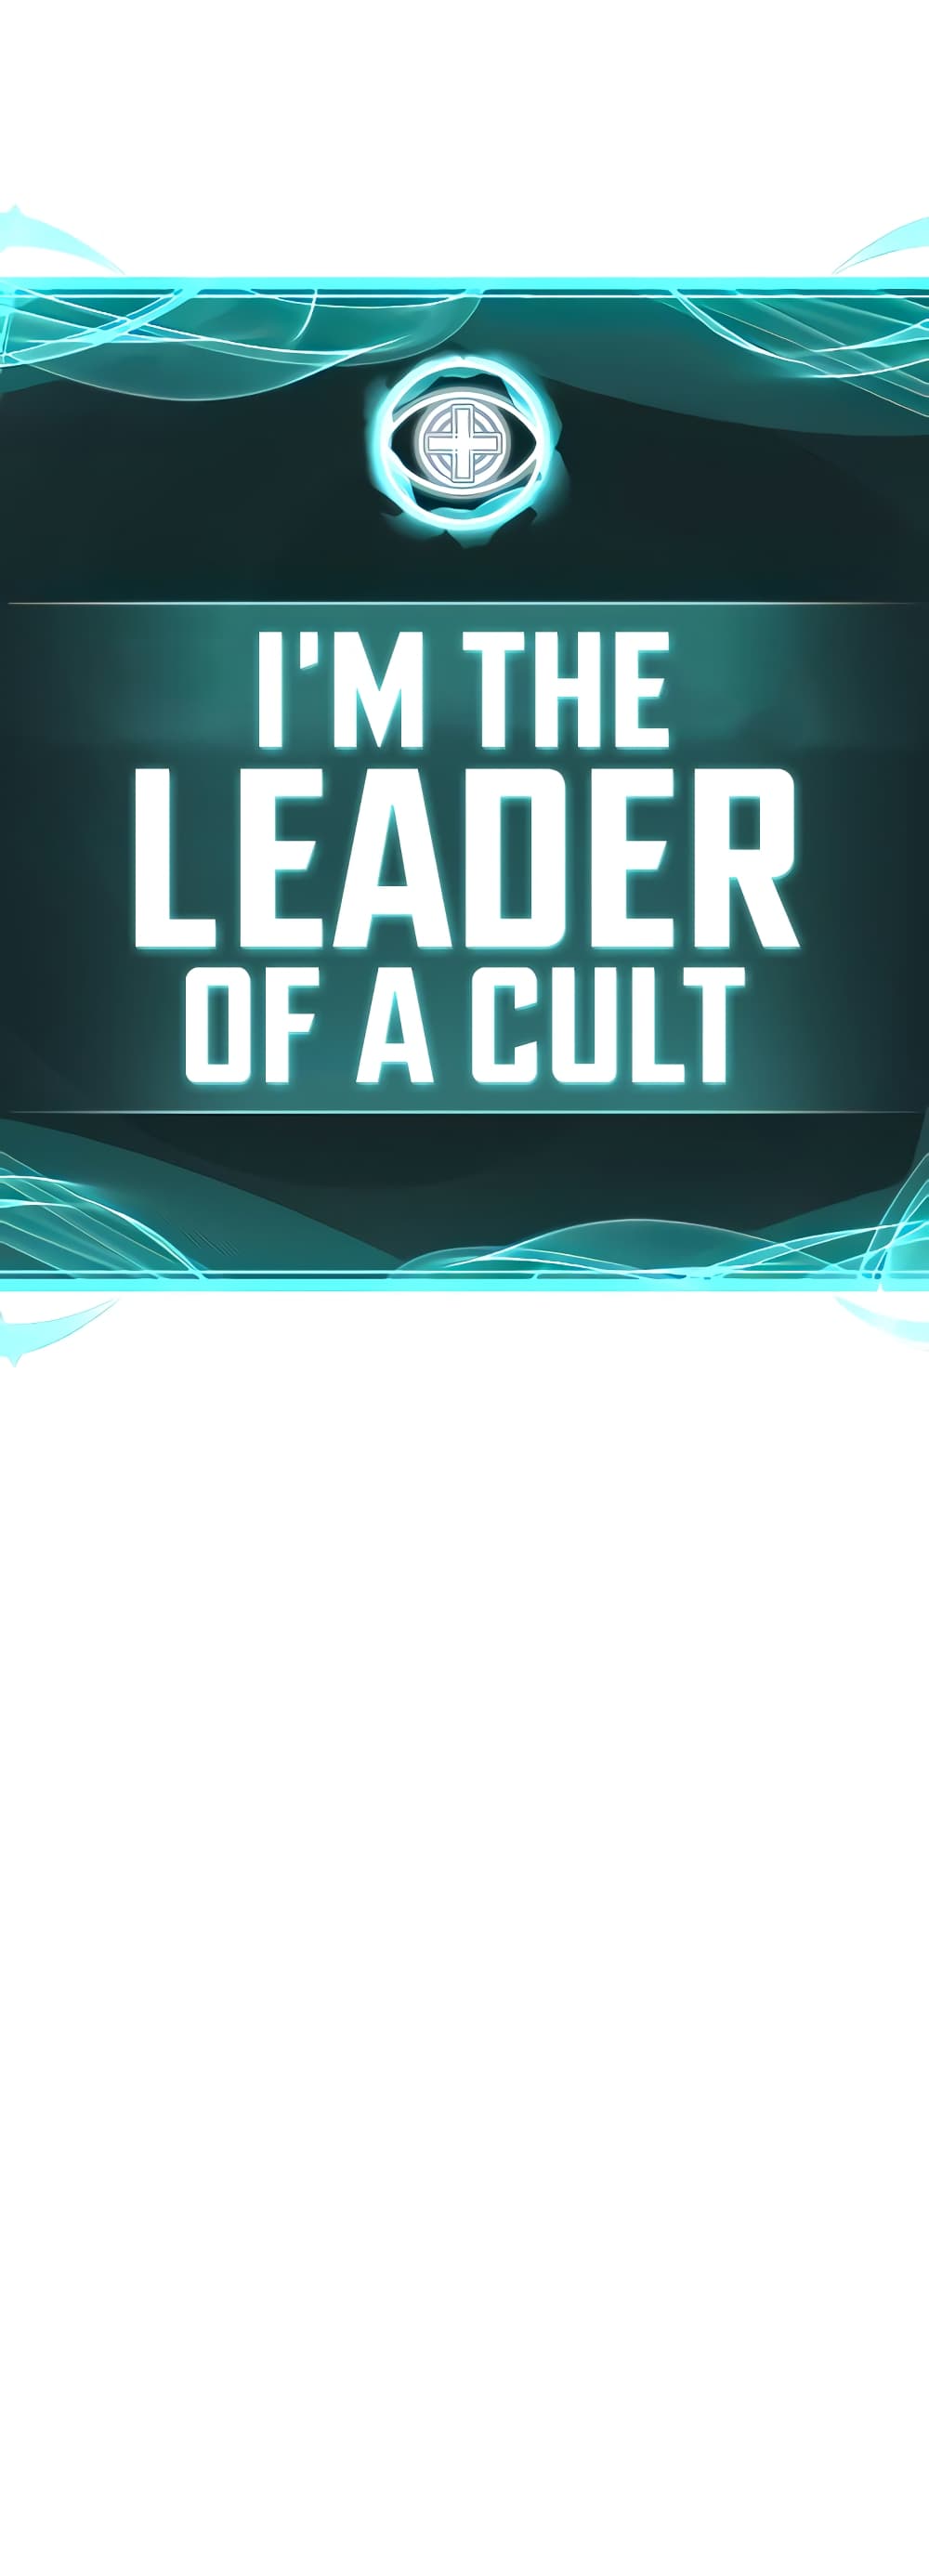 I’m The Leader Of A Cult 19-19